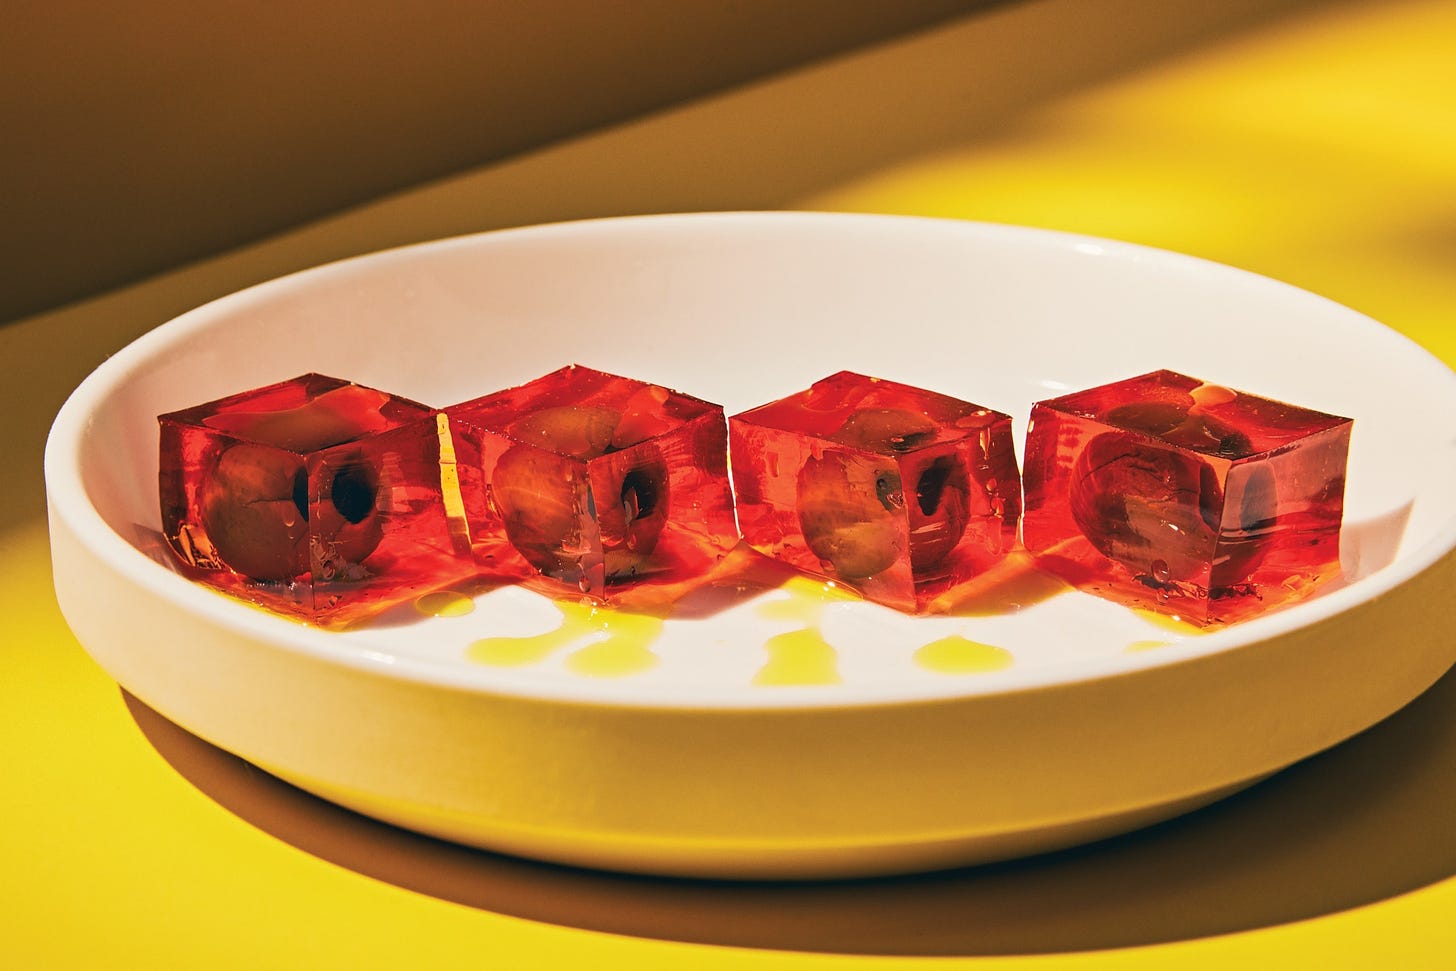 A plate of Negroni jello cubes filled with olives.